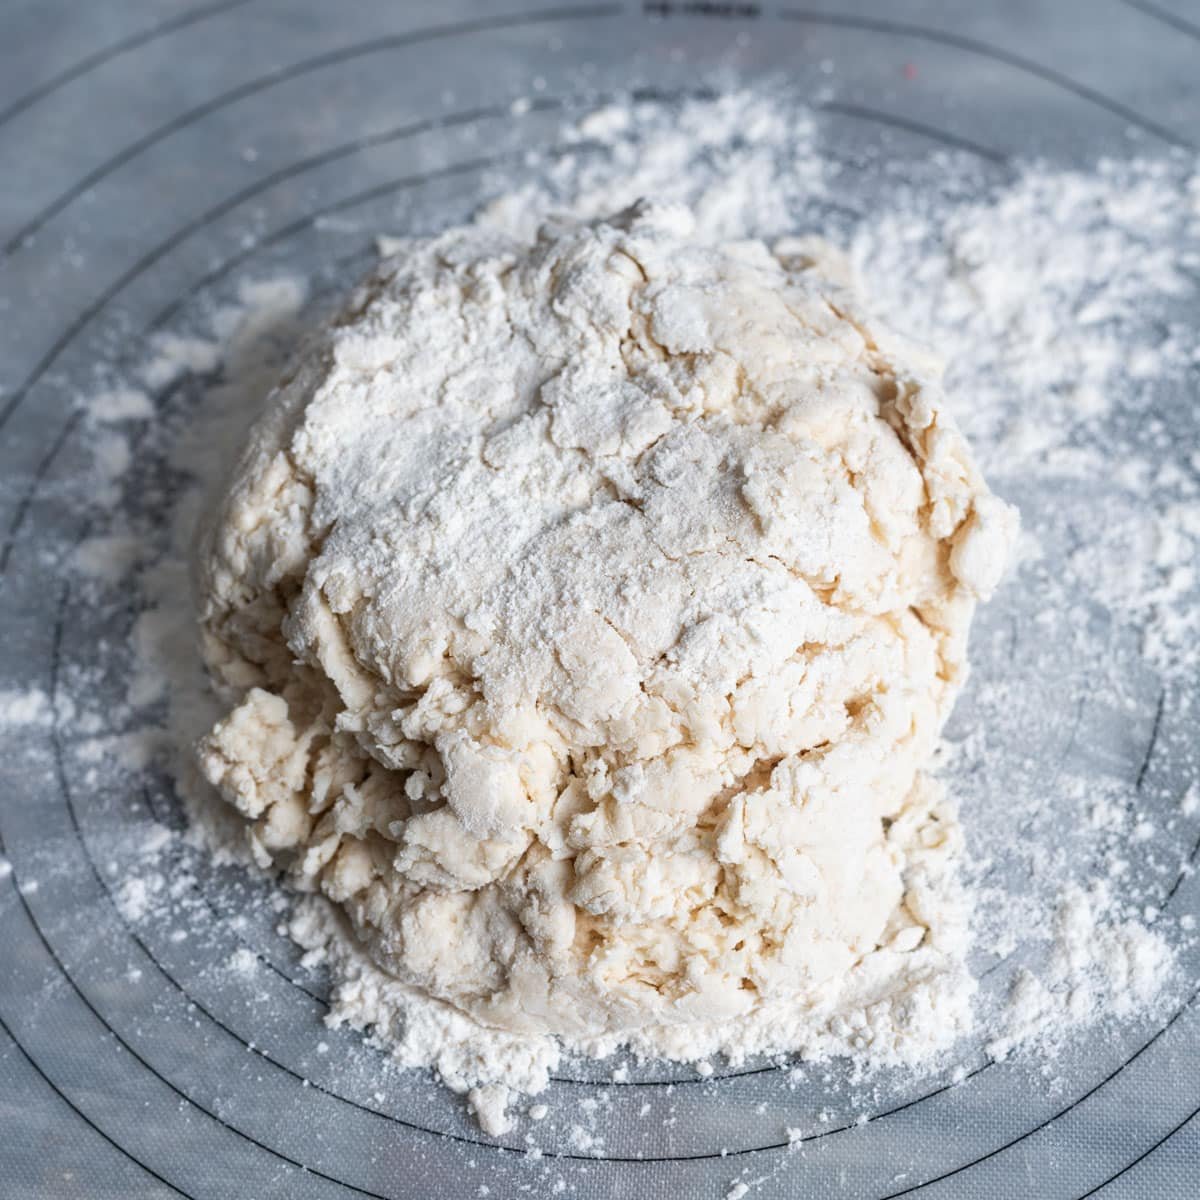 unkneaded dough on a pastry mat